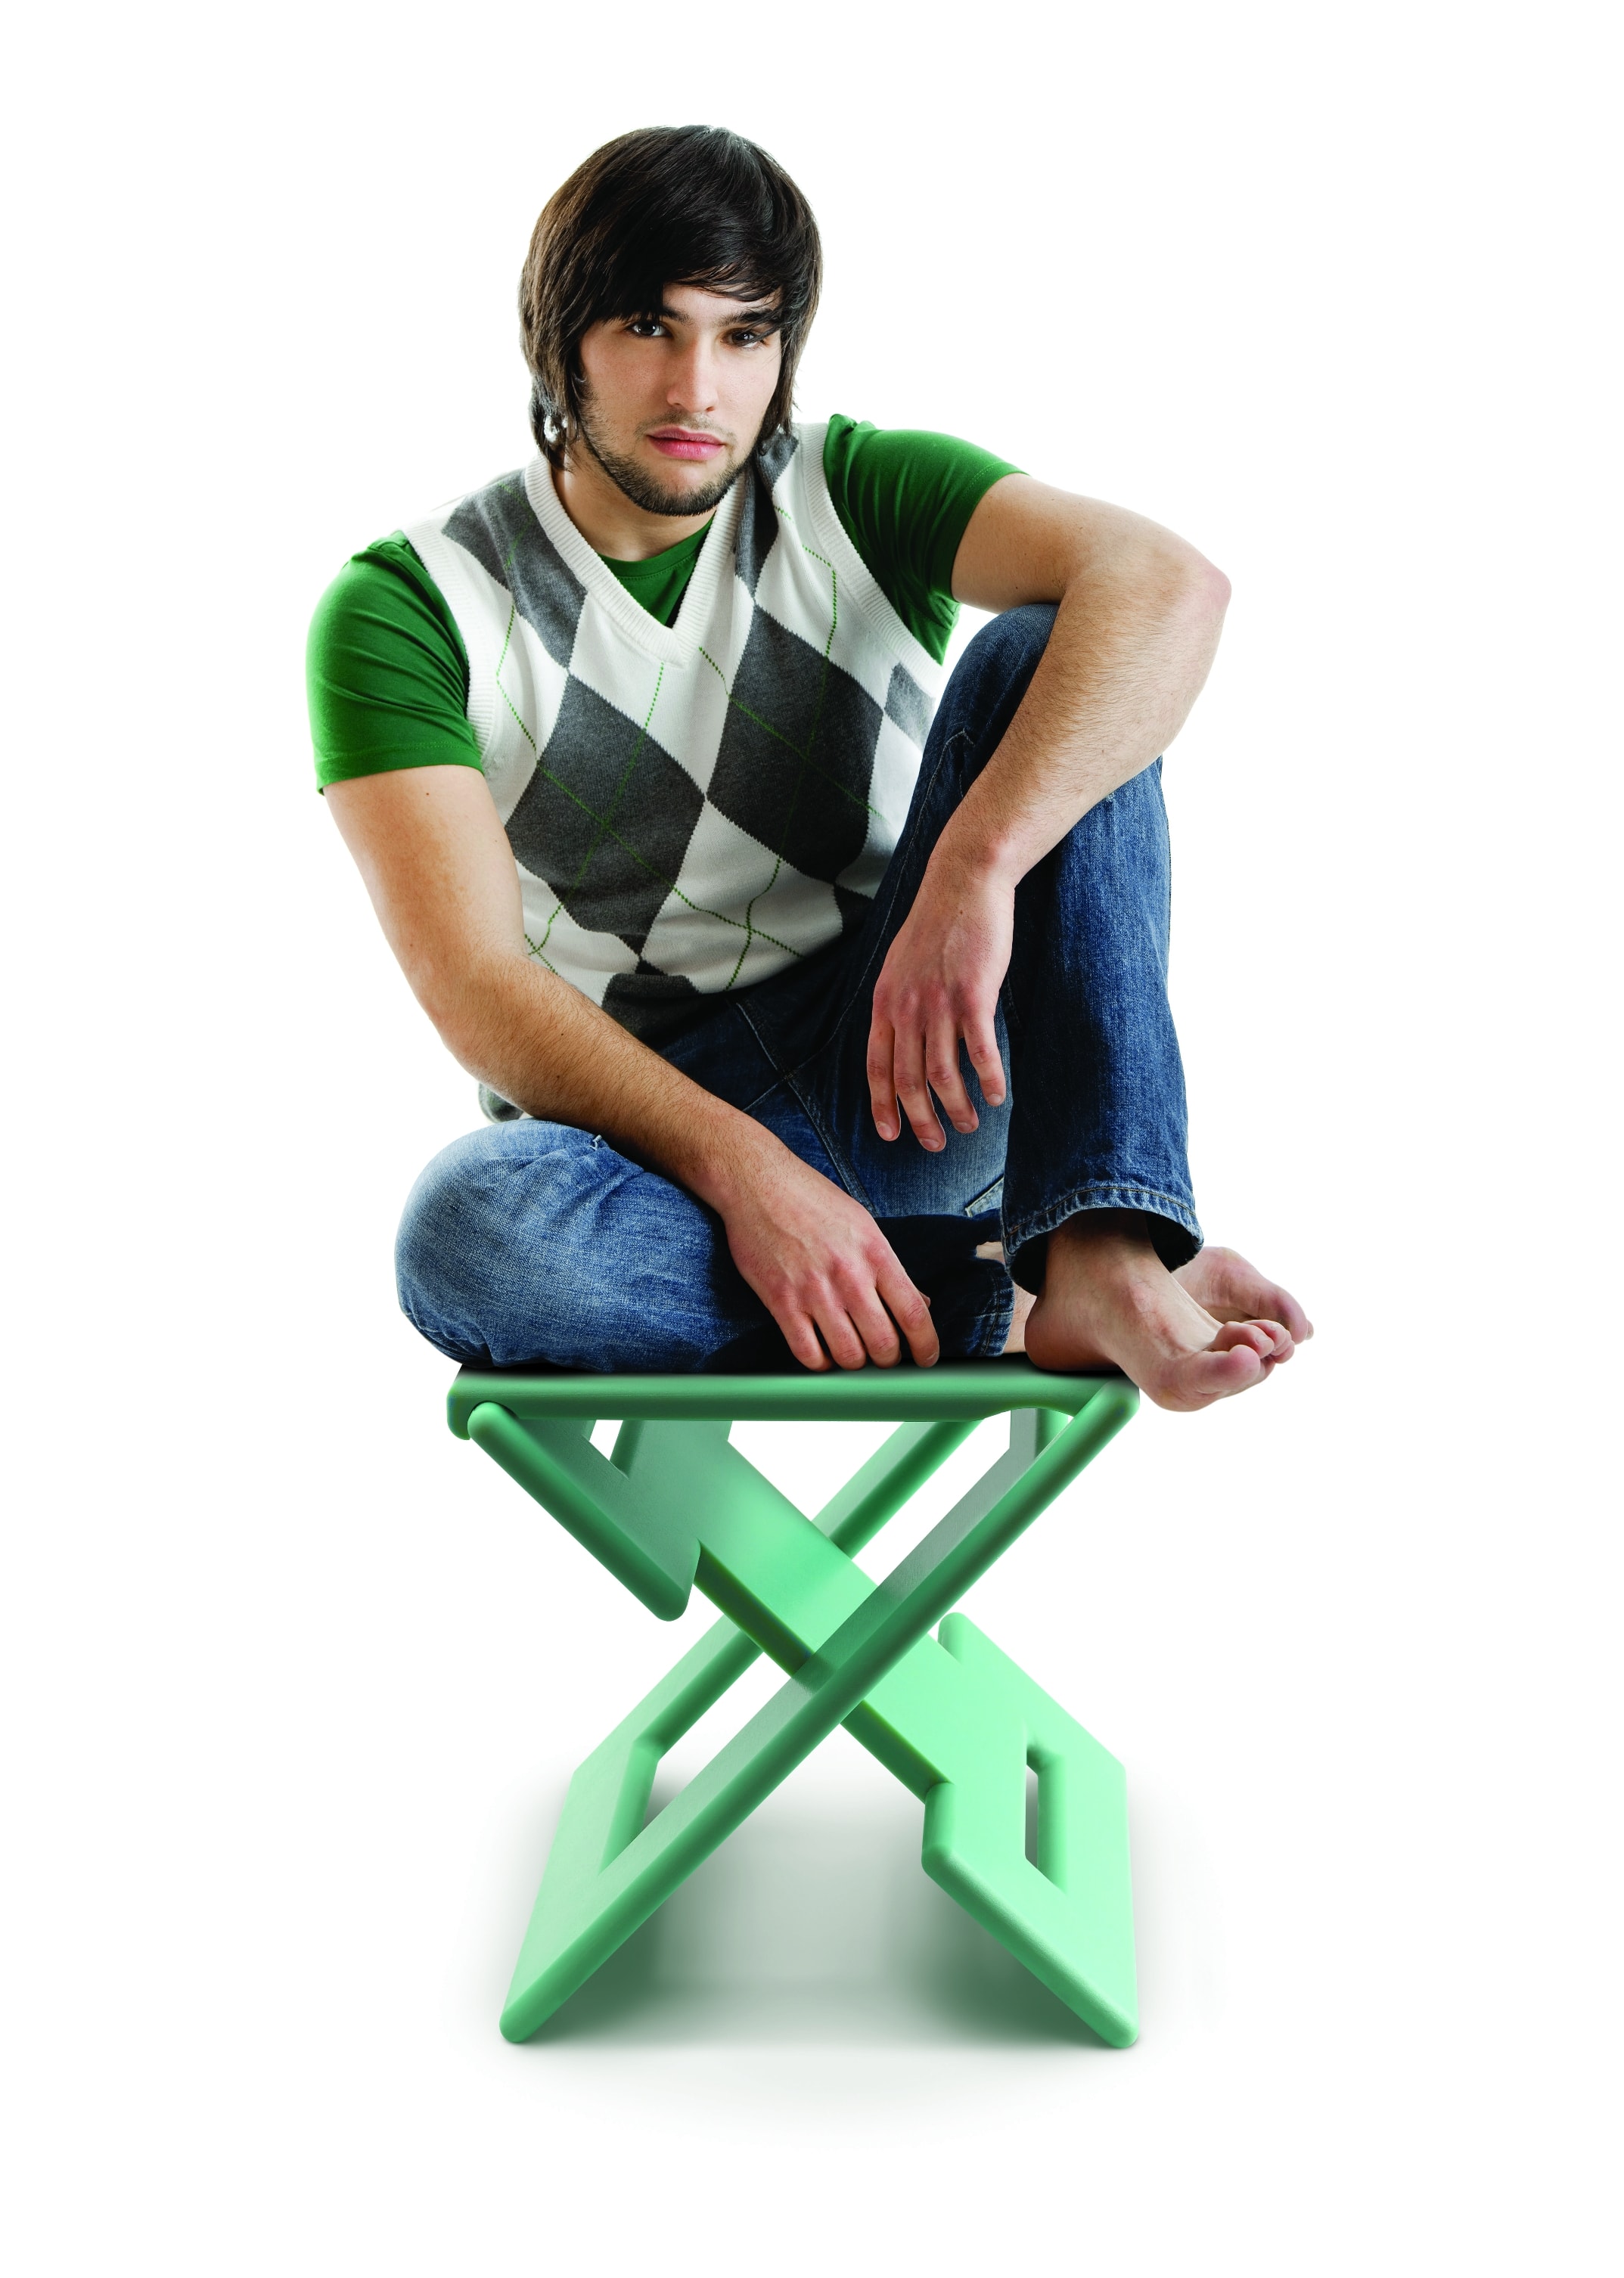 Objet ABS-like stool low res